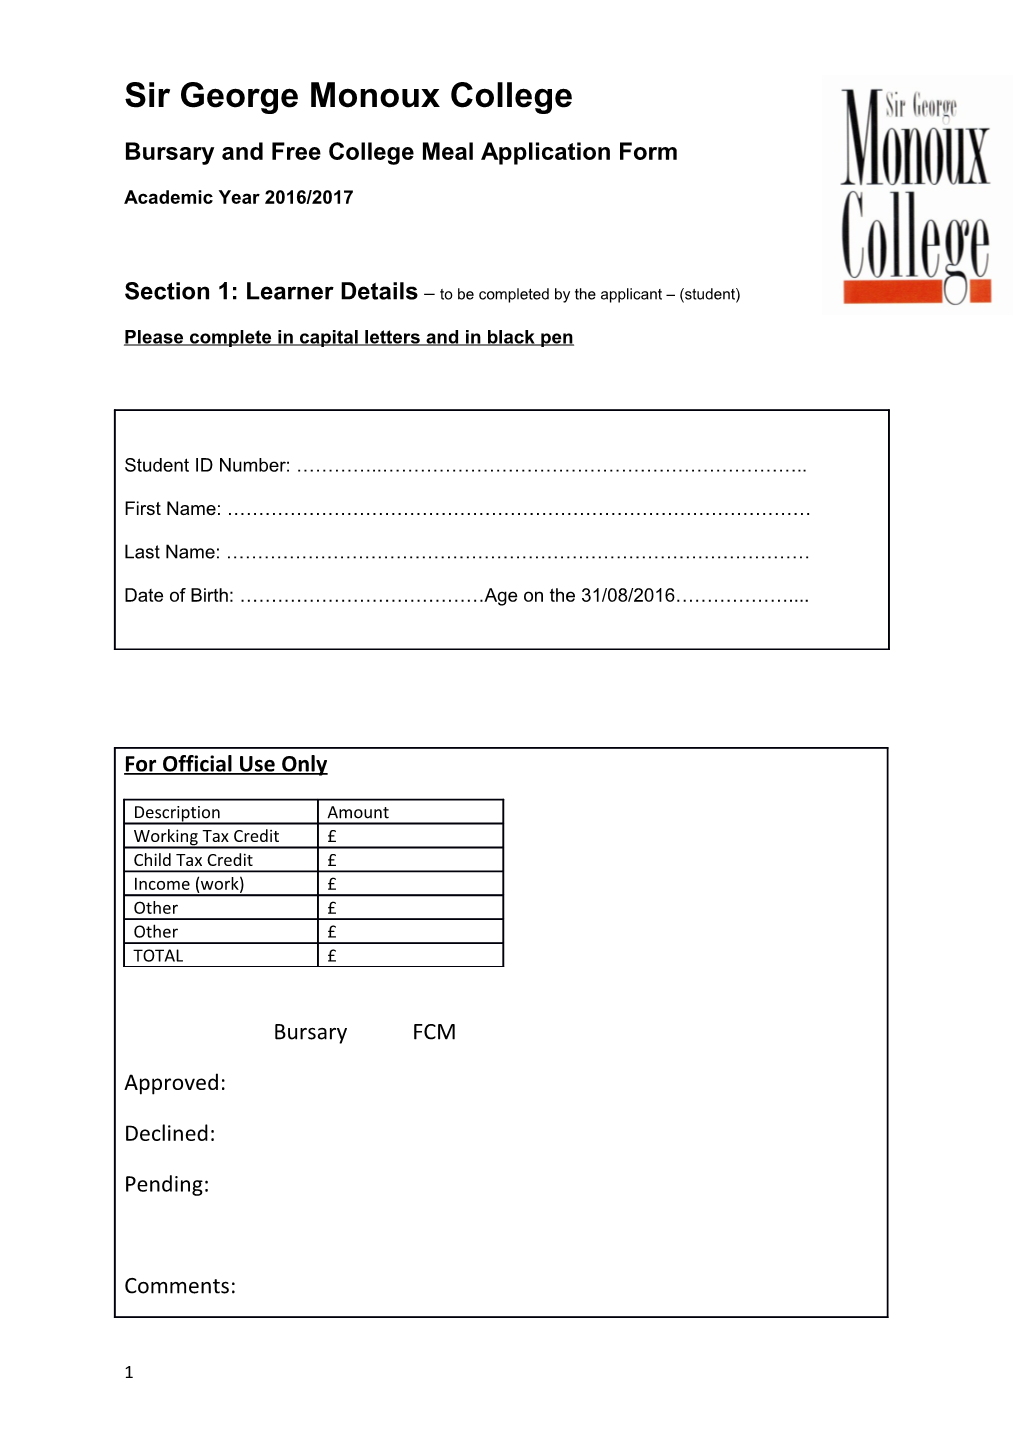 Bursary and Free College Meal Application Form